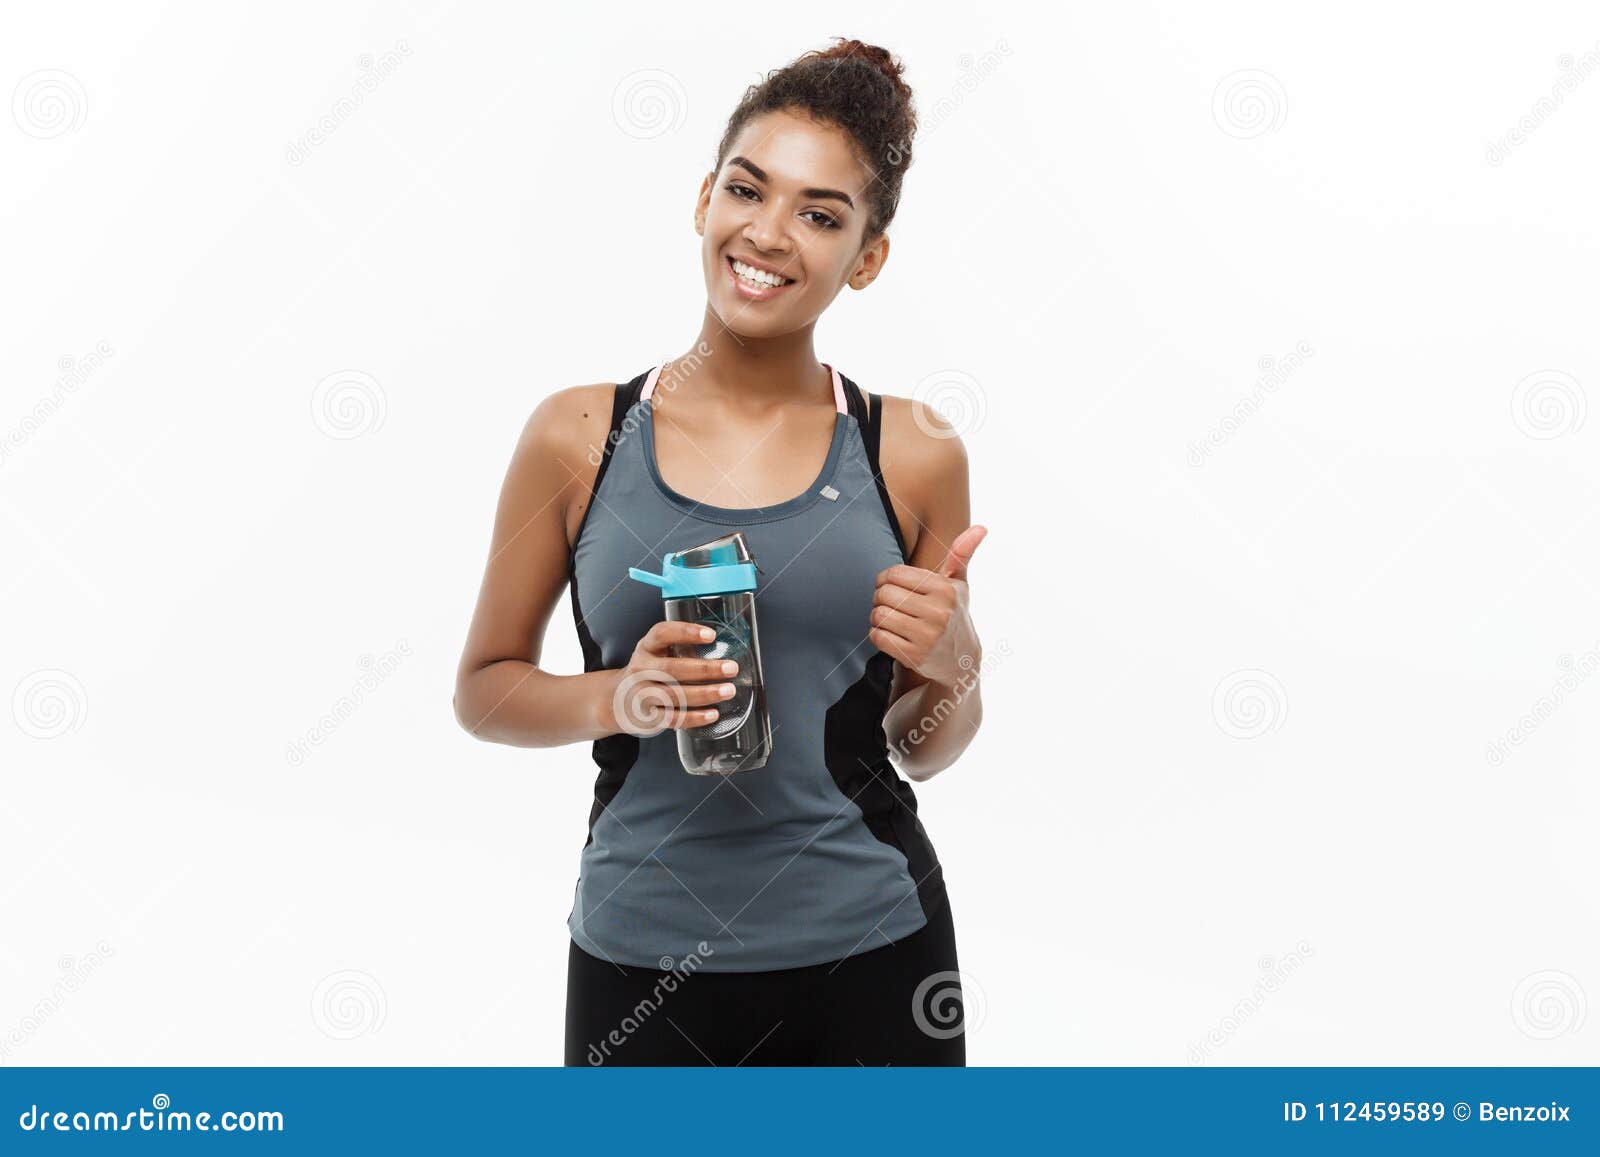 Healthy and Fitness Concept - Beautiful African American Girl in